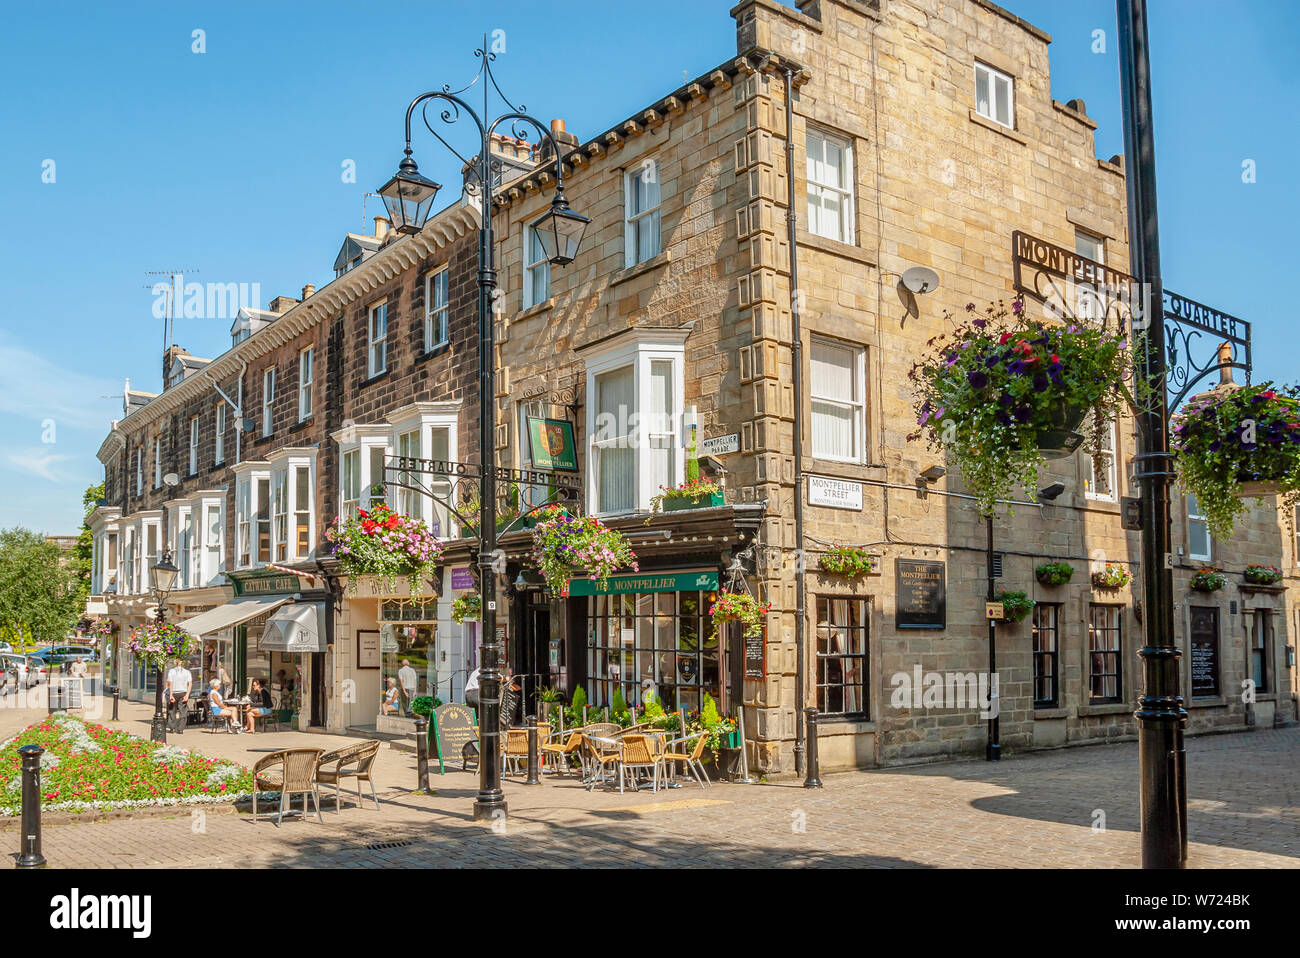 Montpellier Quarter in the town center of Harrogate, North Yorkshire, England, UK Stock Photo